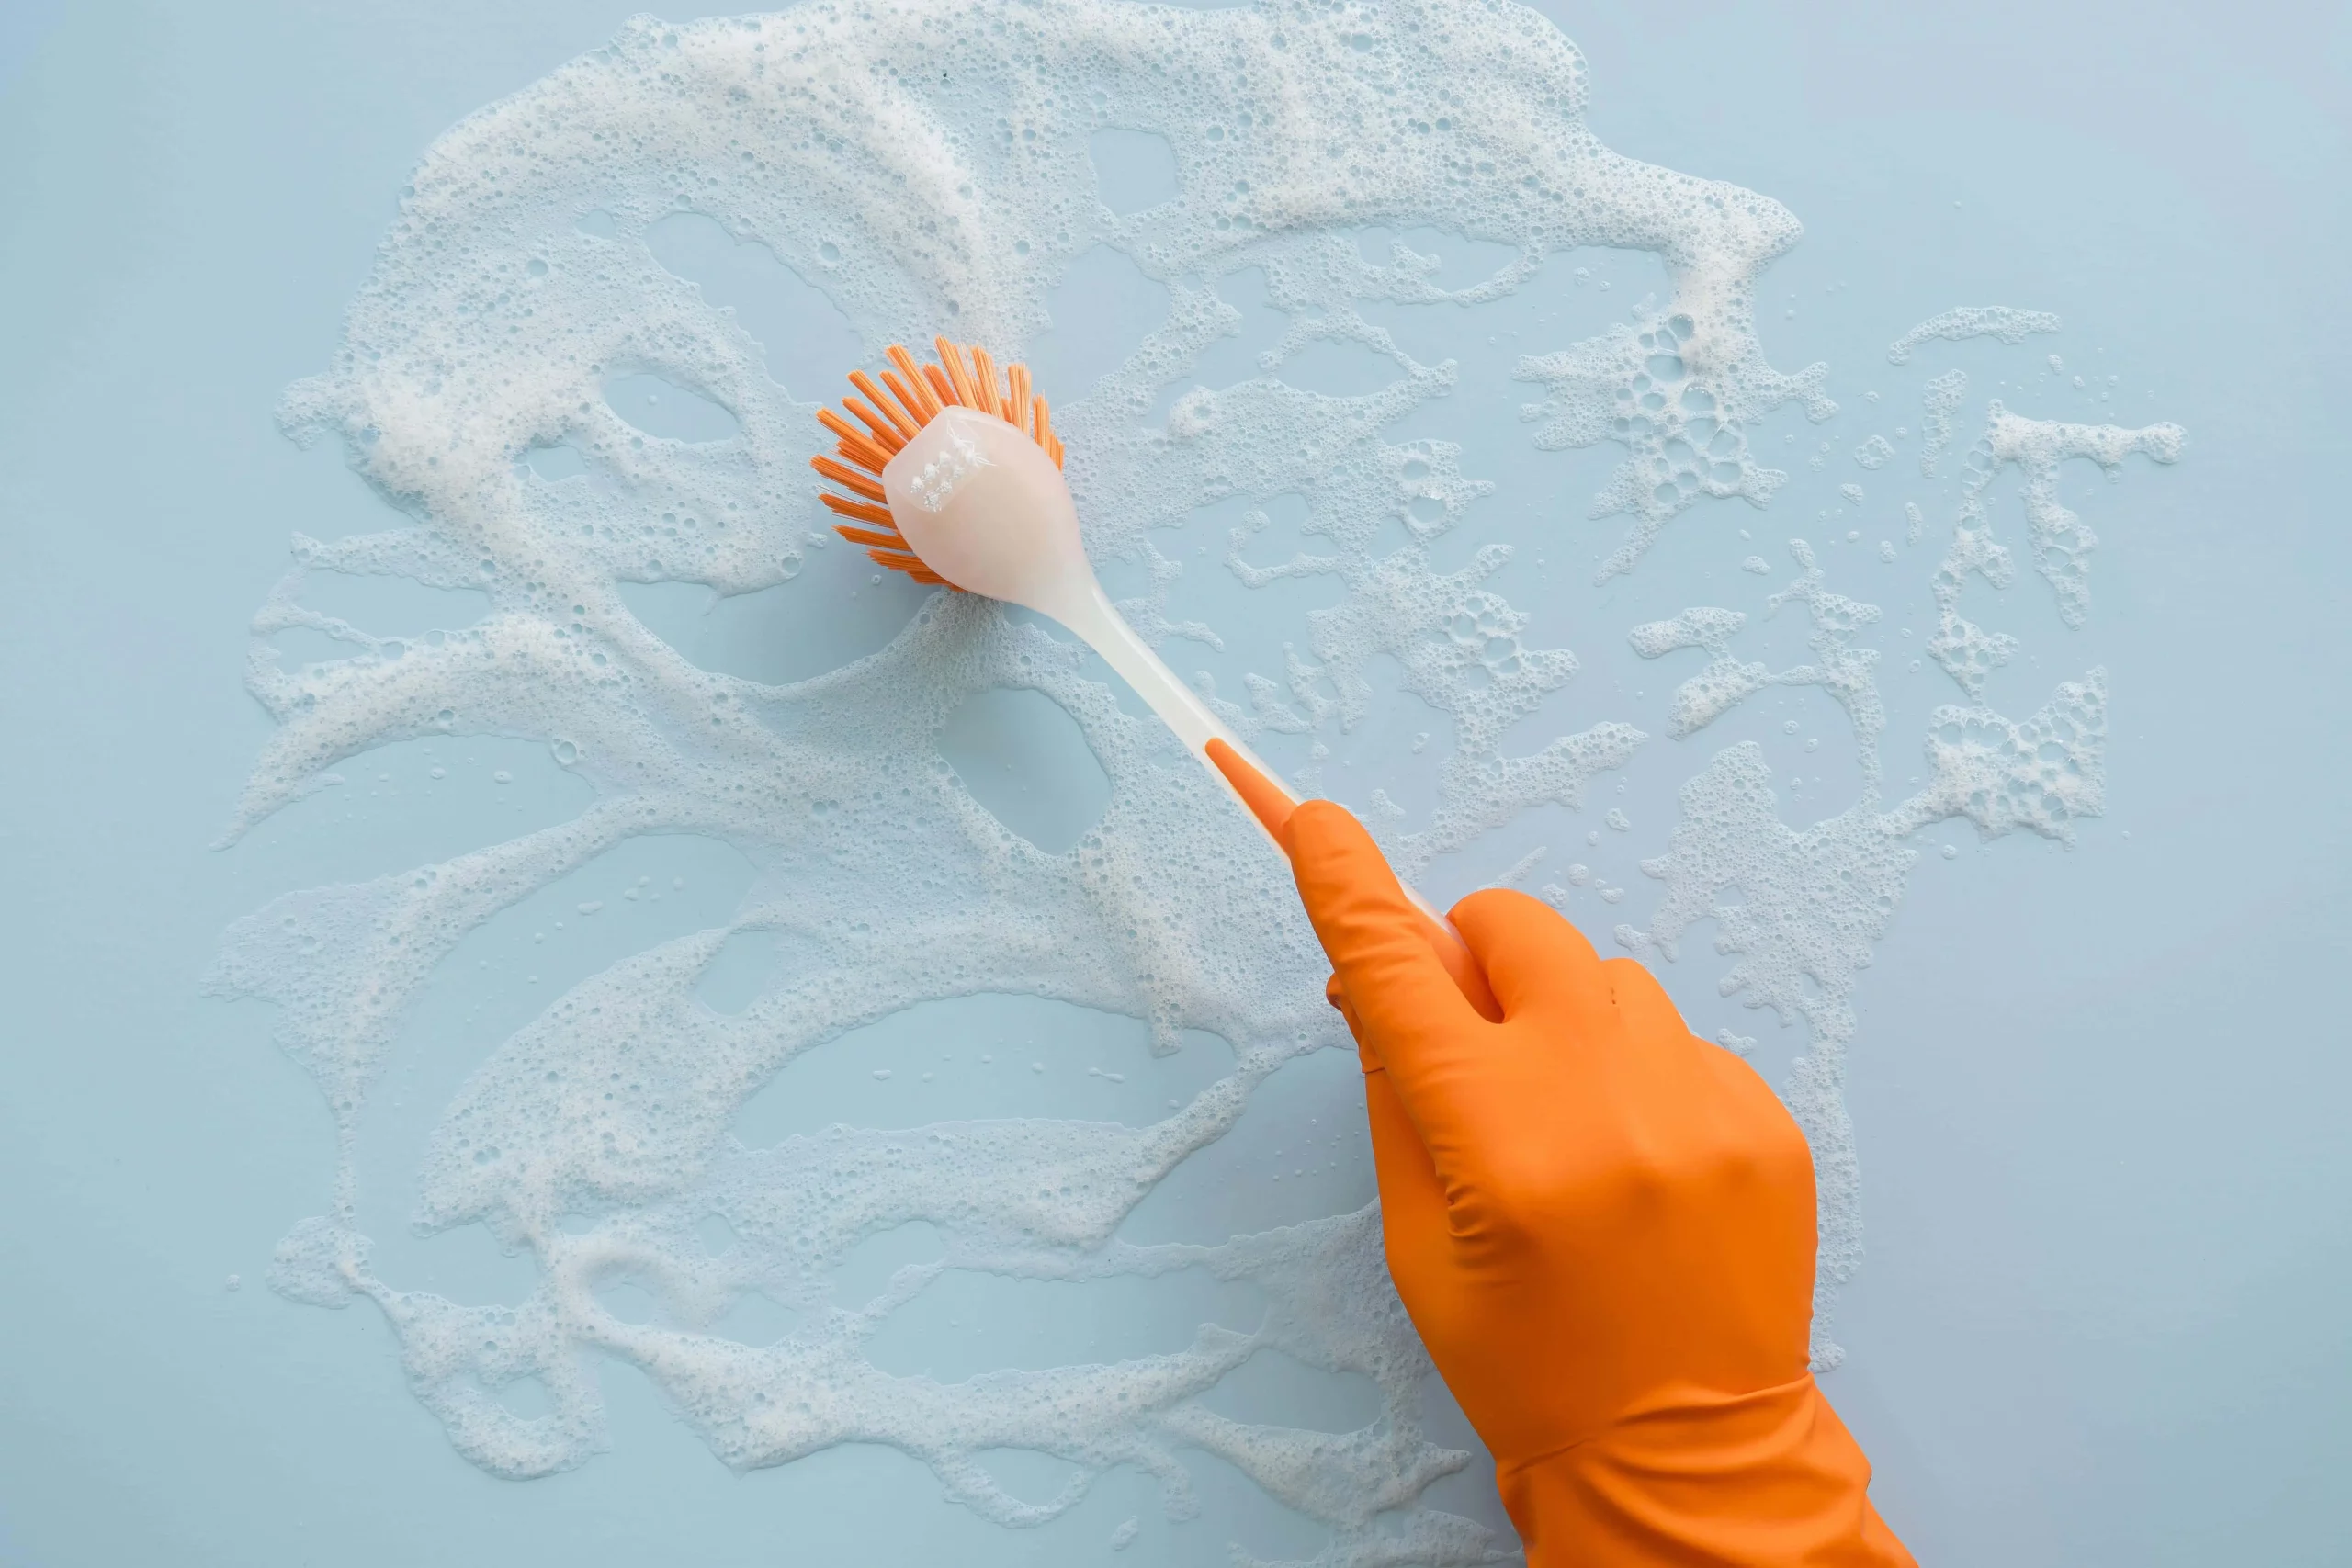 hand with orange glove scrubbing a surface with a brush to clean stains